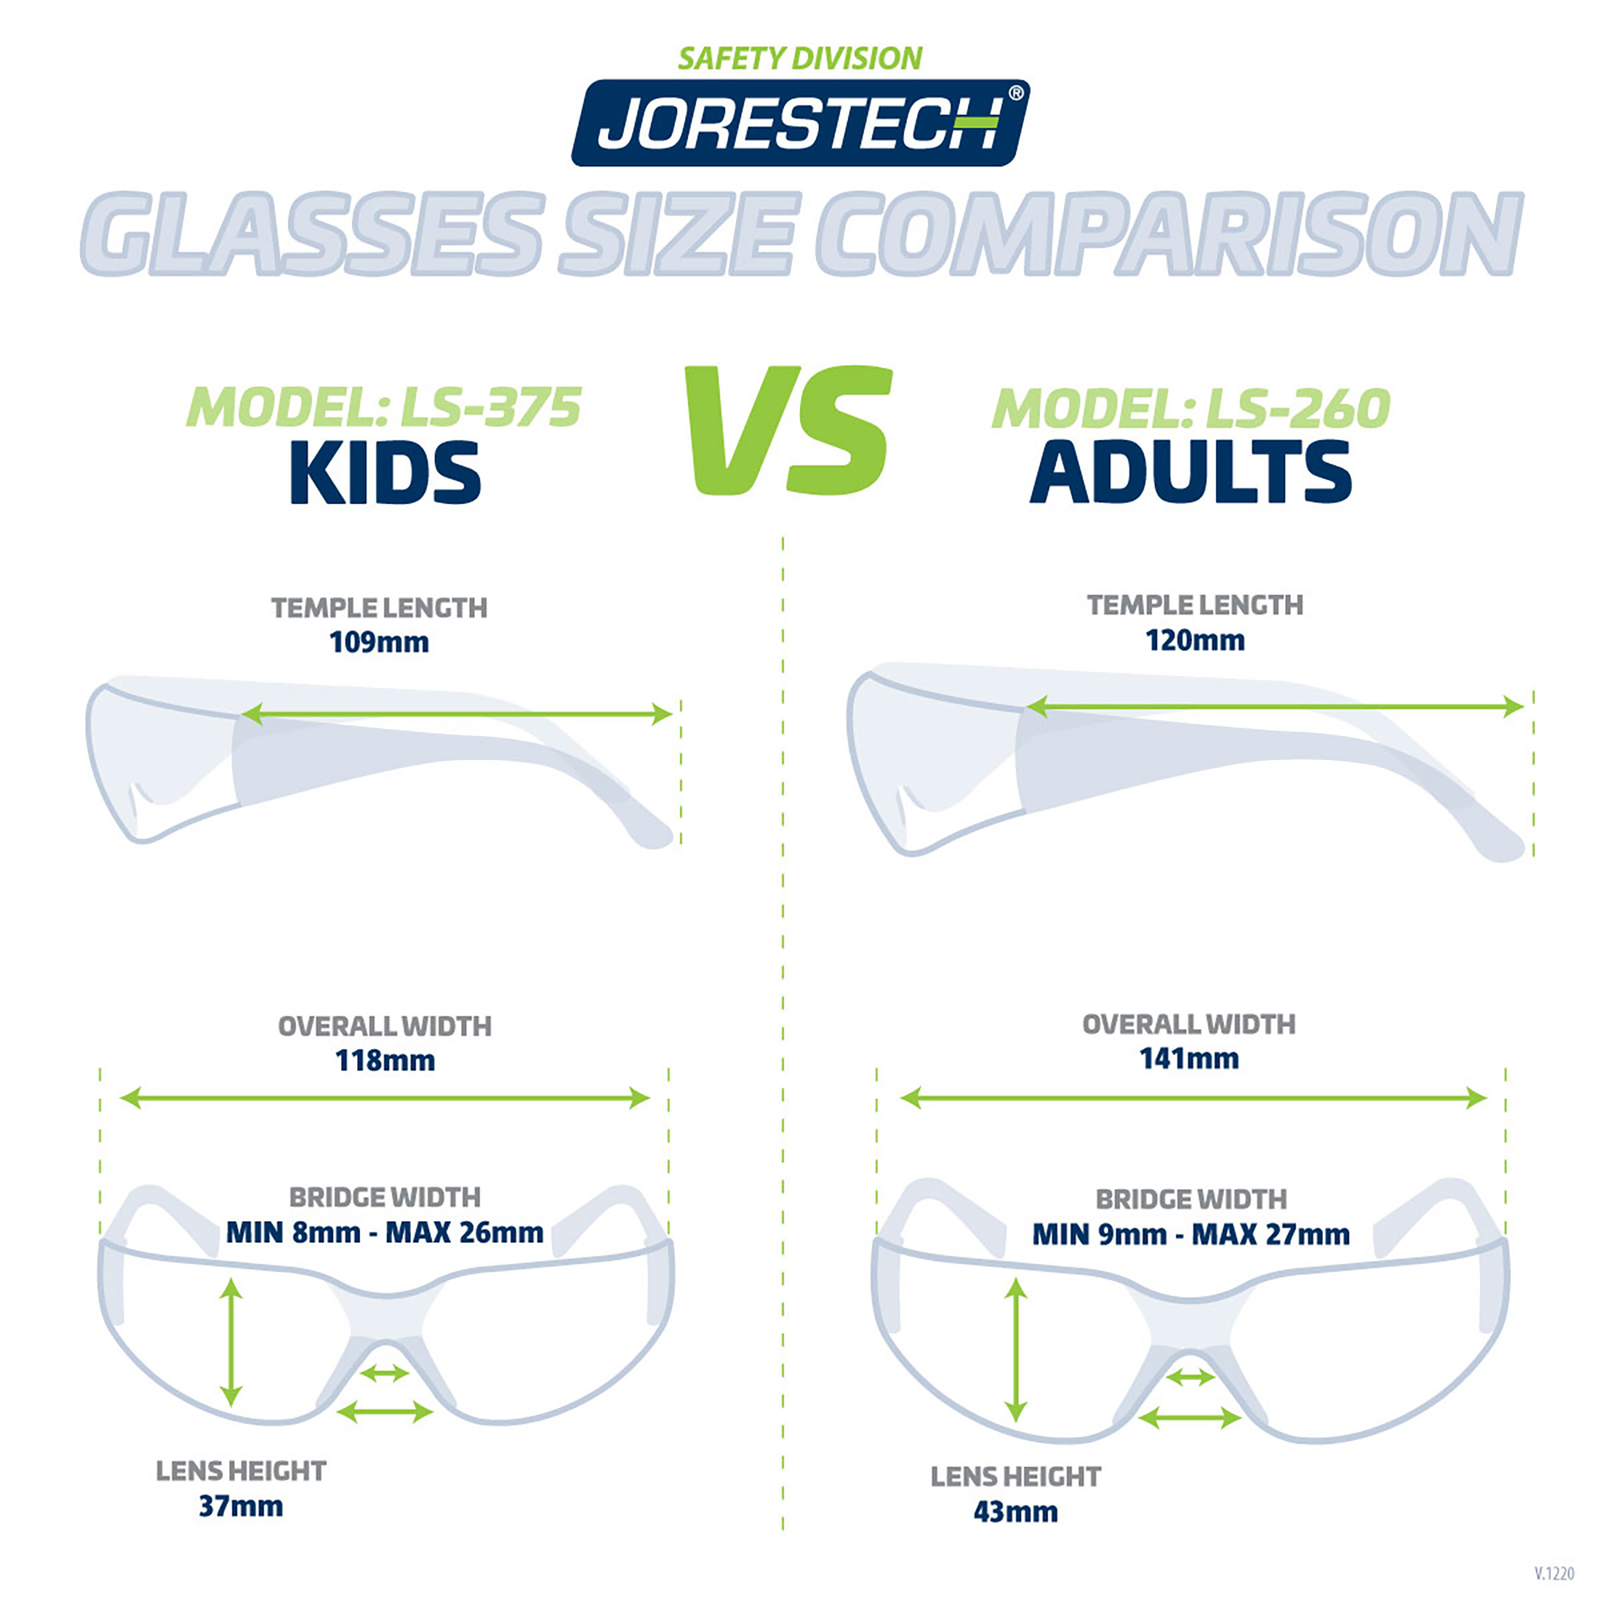 Comparison diagram between the JORESTECH safety glasses 375 for kids and the adults JORESTECH safety glasses 260. Text for kids reads: temple length 109mm, overall width 118mm, lens height 37mm and max and min bridge width 26mm and 8mm. Text for adults reads: temple length 120mm, overall width 141mm, lens height 43mm and max and min bridge width 27mm and 9mm